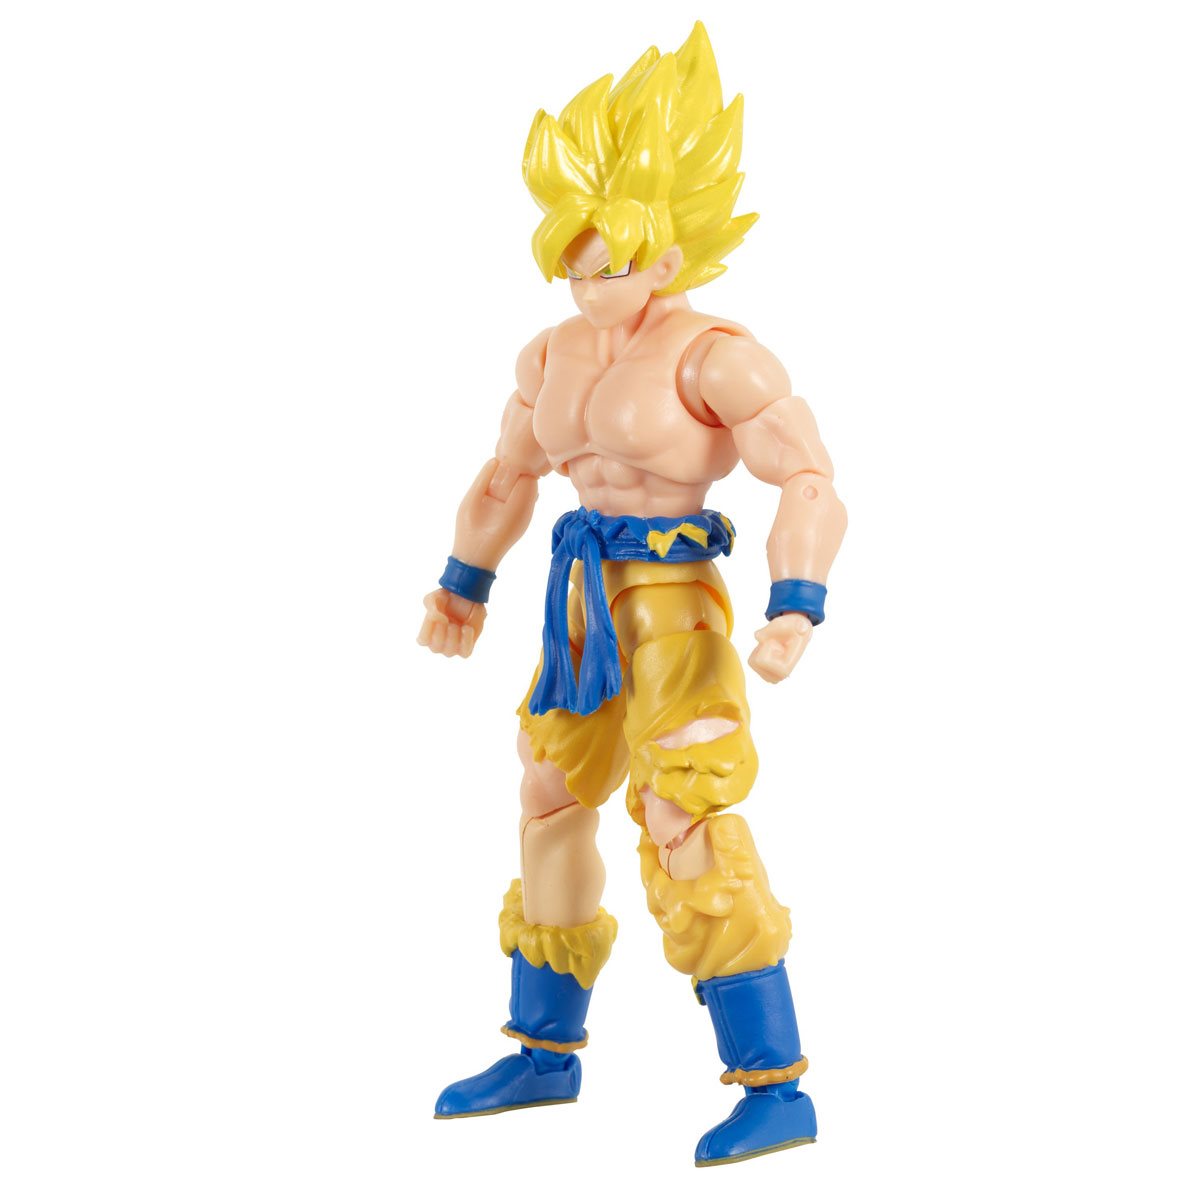 Dragon Ball Super Evolve Lord Beerus - 5 Action Figure - No